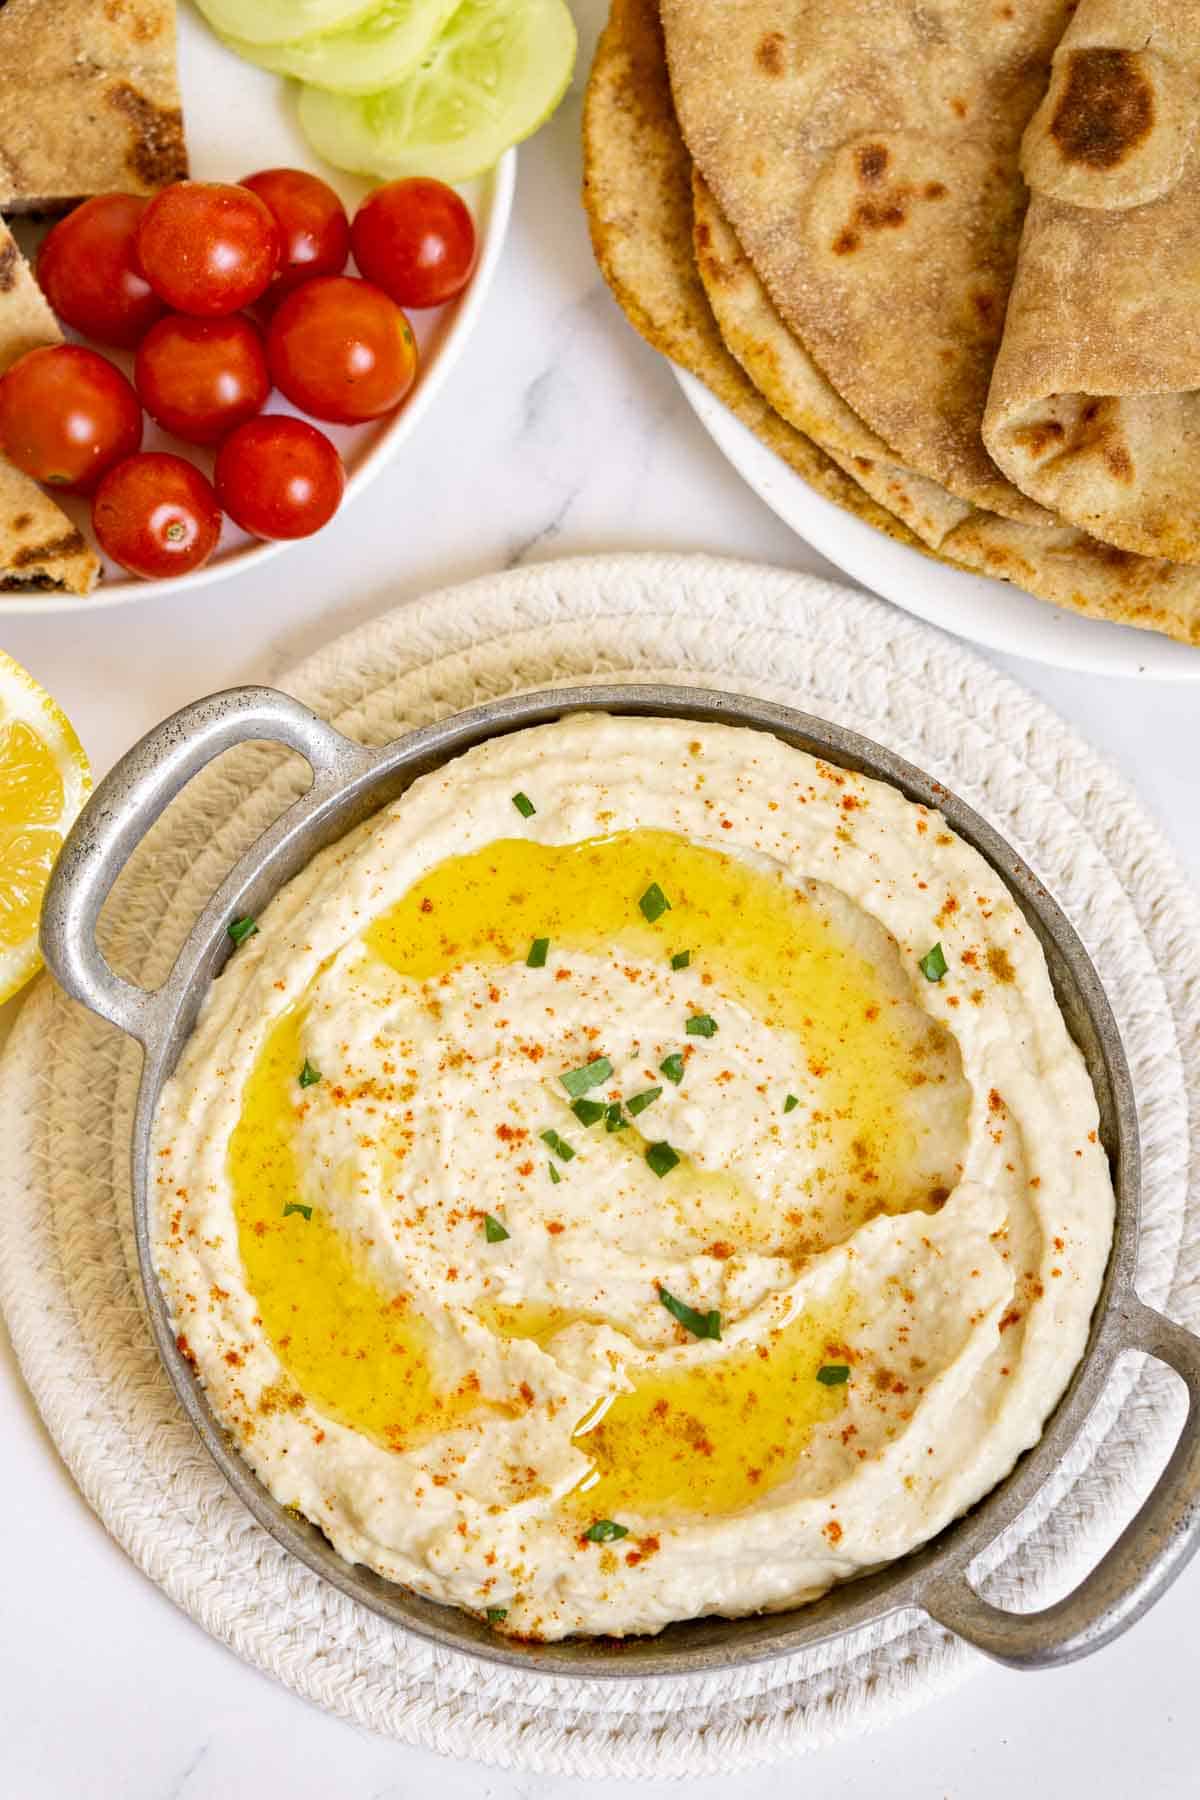 Butterbean hummus in a bowl with pita, tomatoes, cucumbers on the side